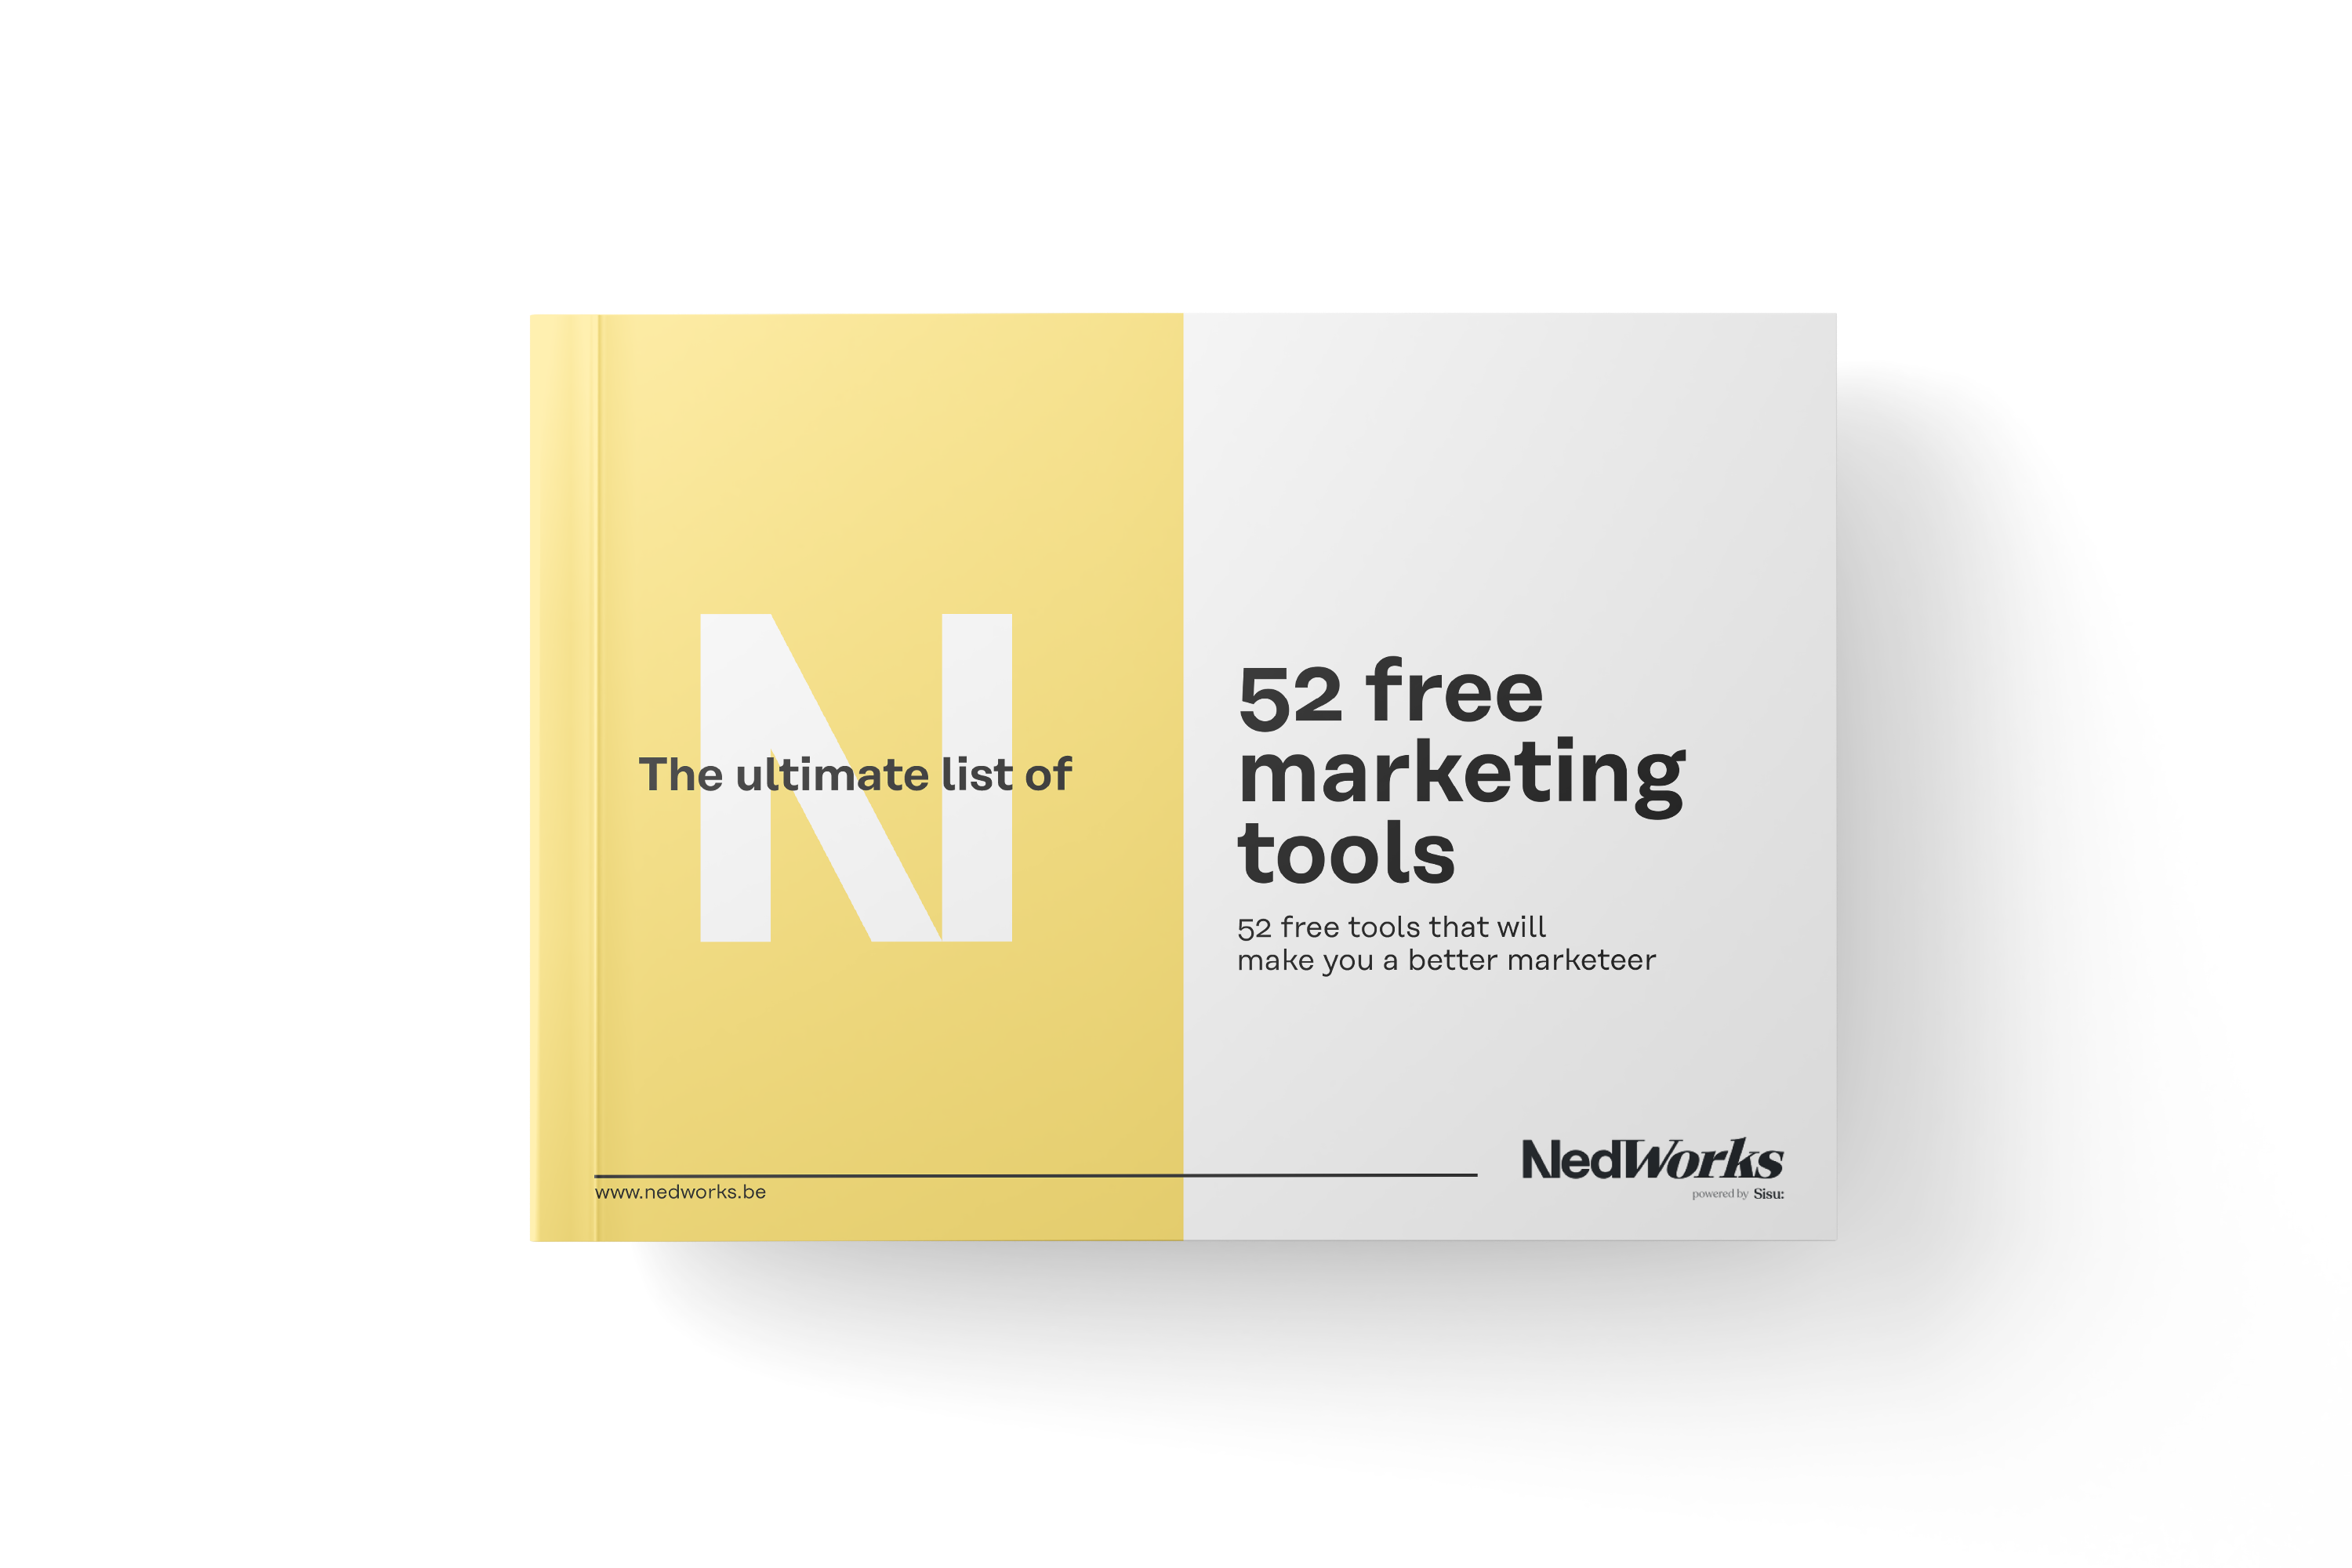 Free e-book for online marketers: 52 free tools and tactics to become better and more efficient at online marketing